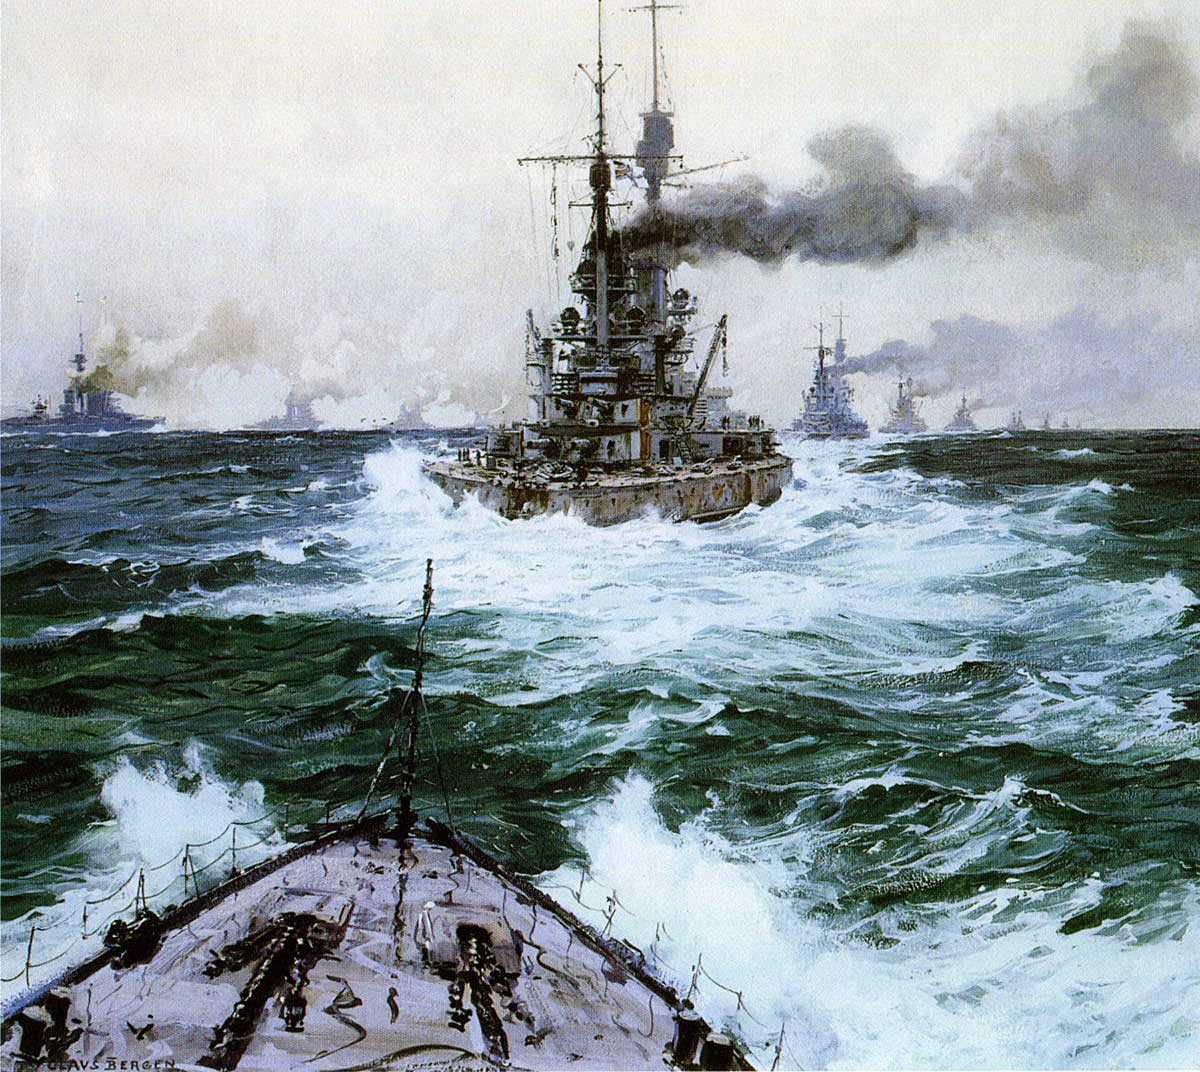 German High Seas Fleet leaving for the North Sea on 30th May 1916 for the Battle of Jutland: picture by Claus Bergen